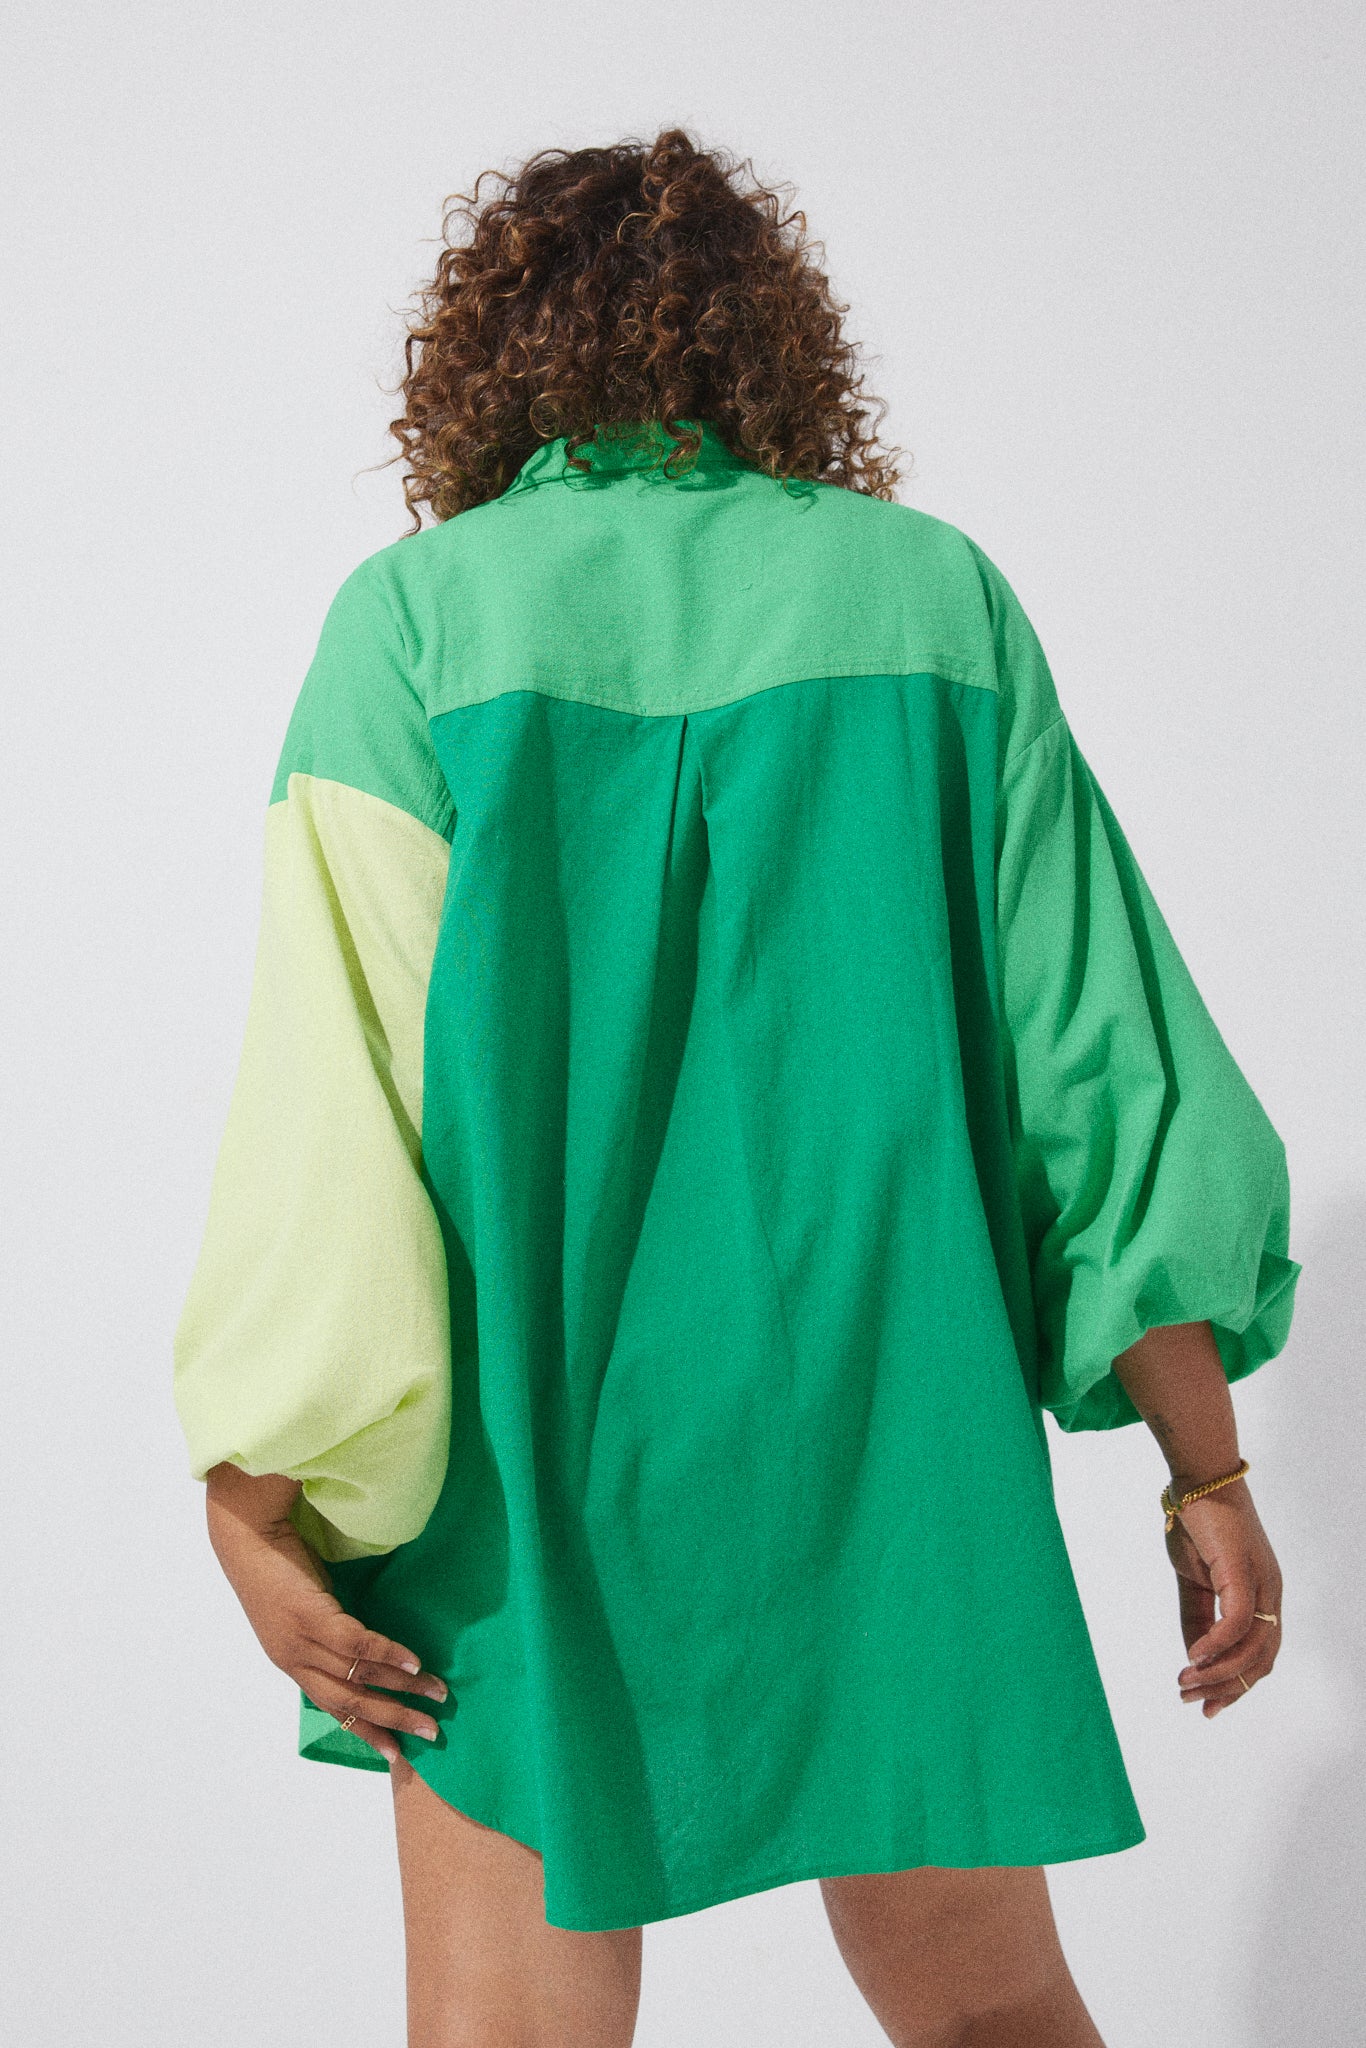 Myer Smock - Meadow